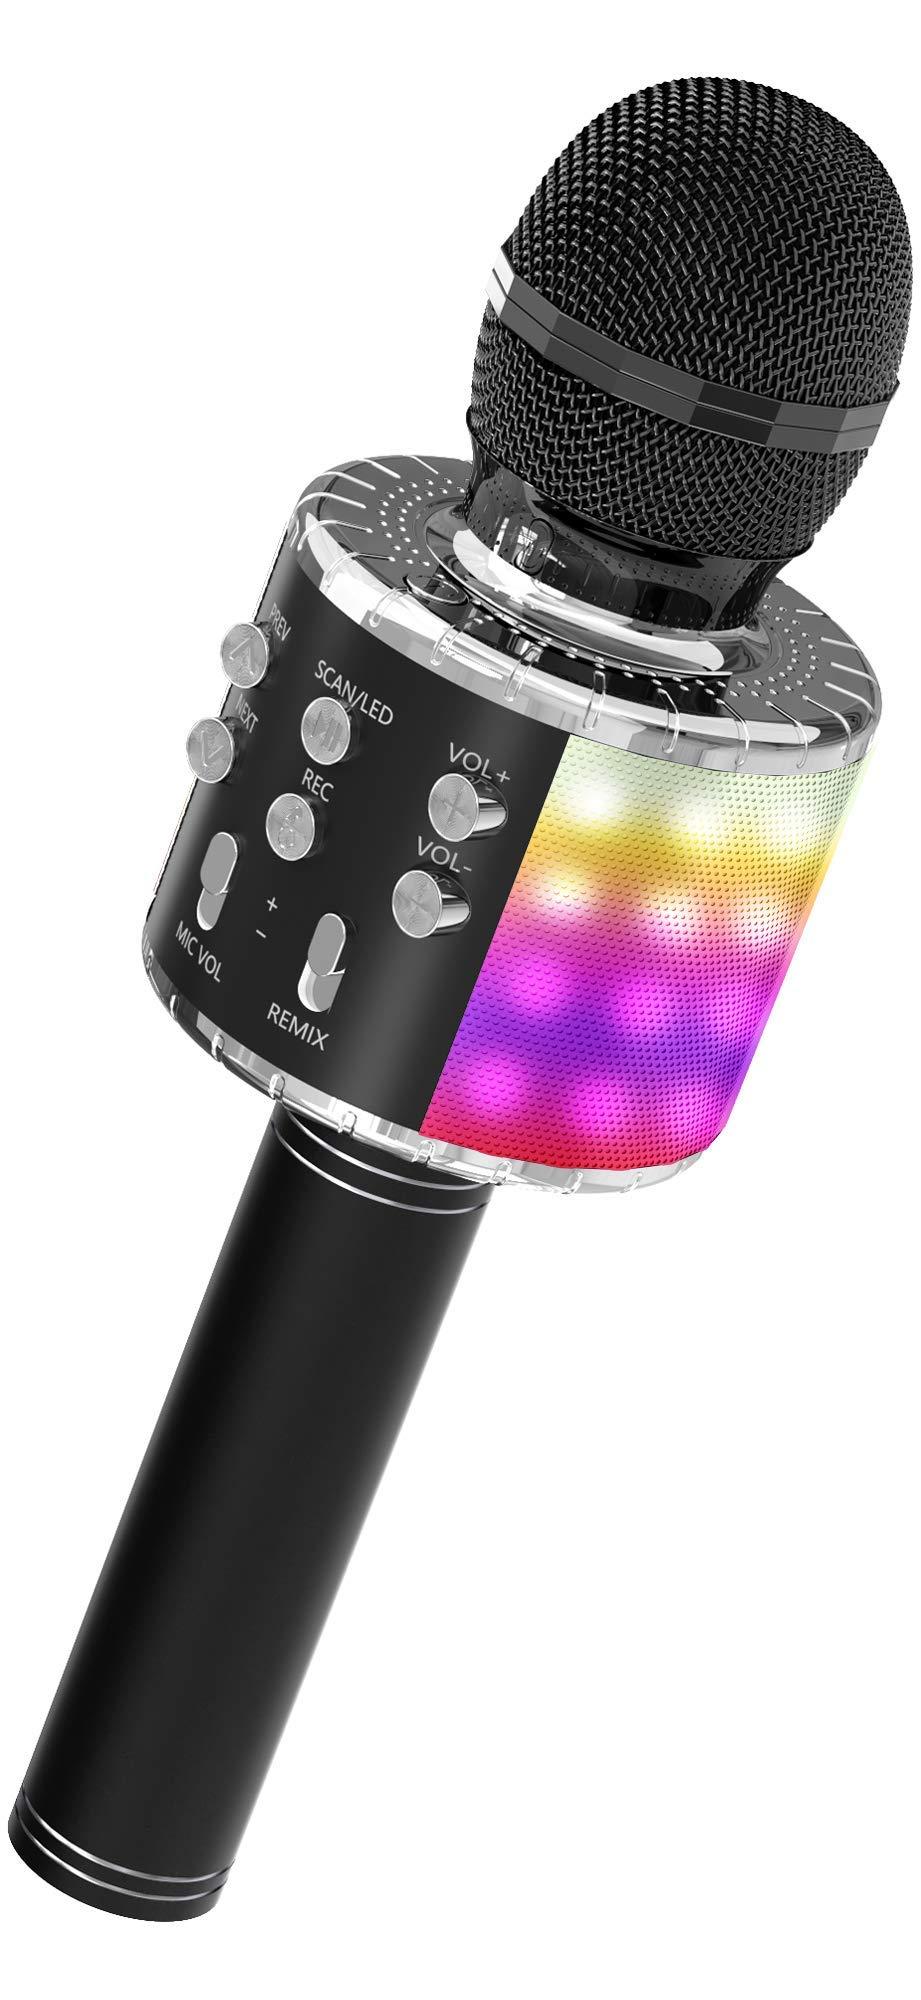 OVELLIC Karaoke Microphone for Kids, Wireless Bluetooth Karaoke Microphone with LED Lights, Portable Handheld Mic Speaker Machine, Great Gifts Toys for Girls Boys Adults All Age (Black) Black